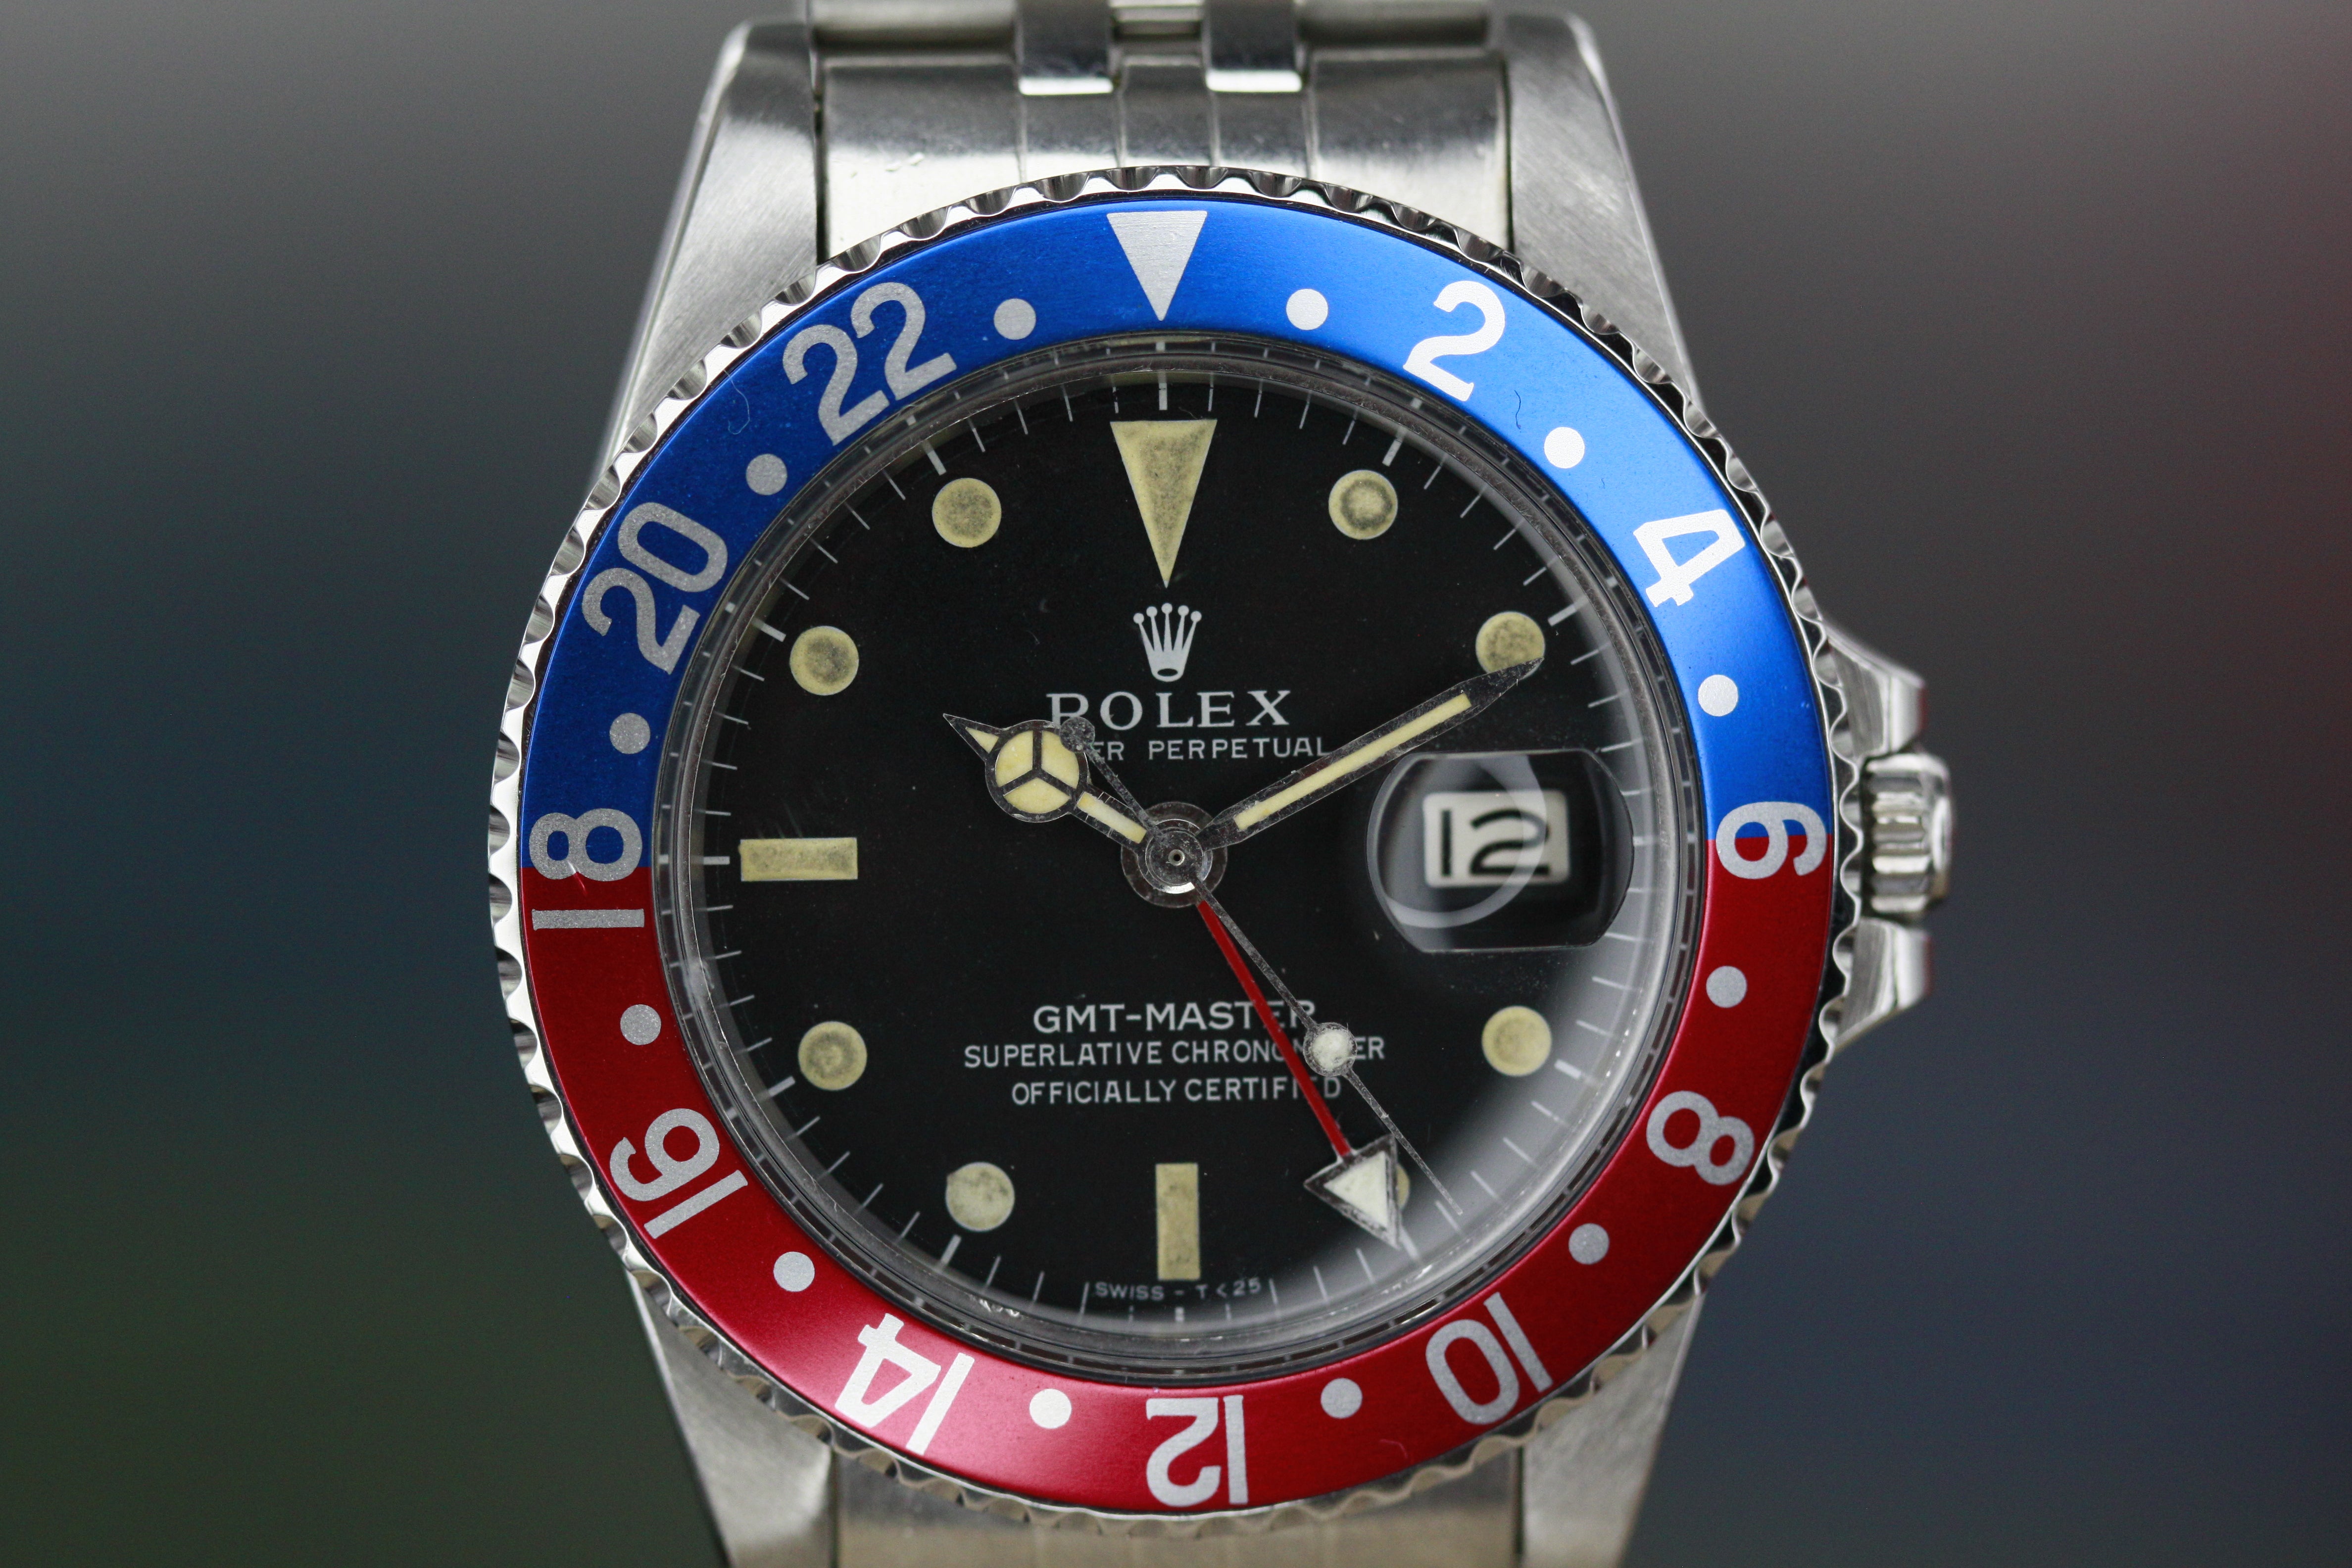 Rolex Oyster Perpetual Gmt-Master Ref.1675 ca.1970 Pepsi